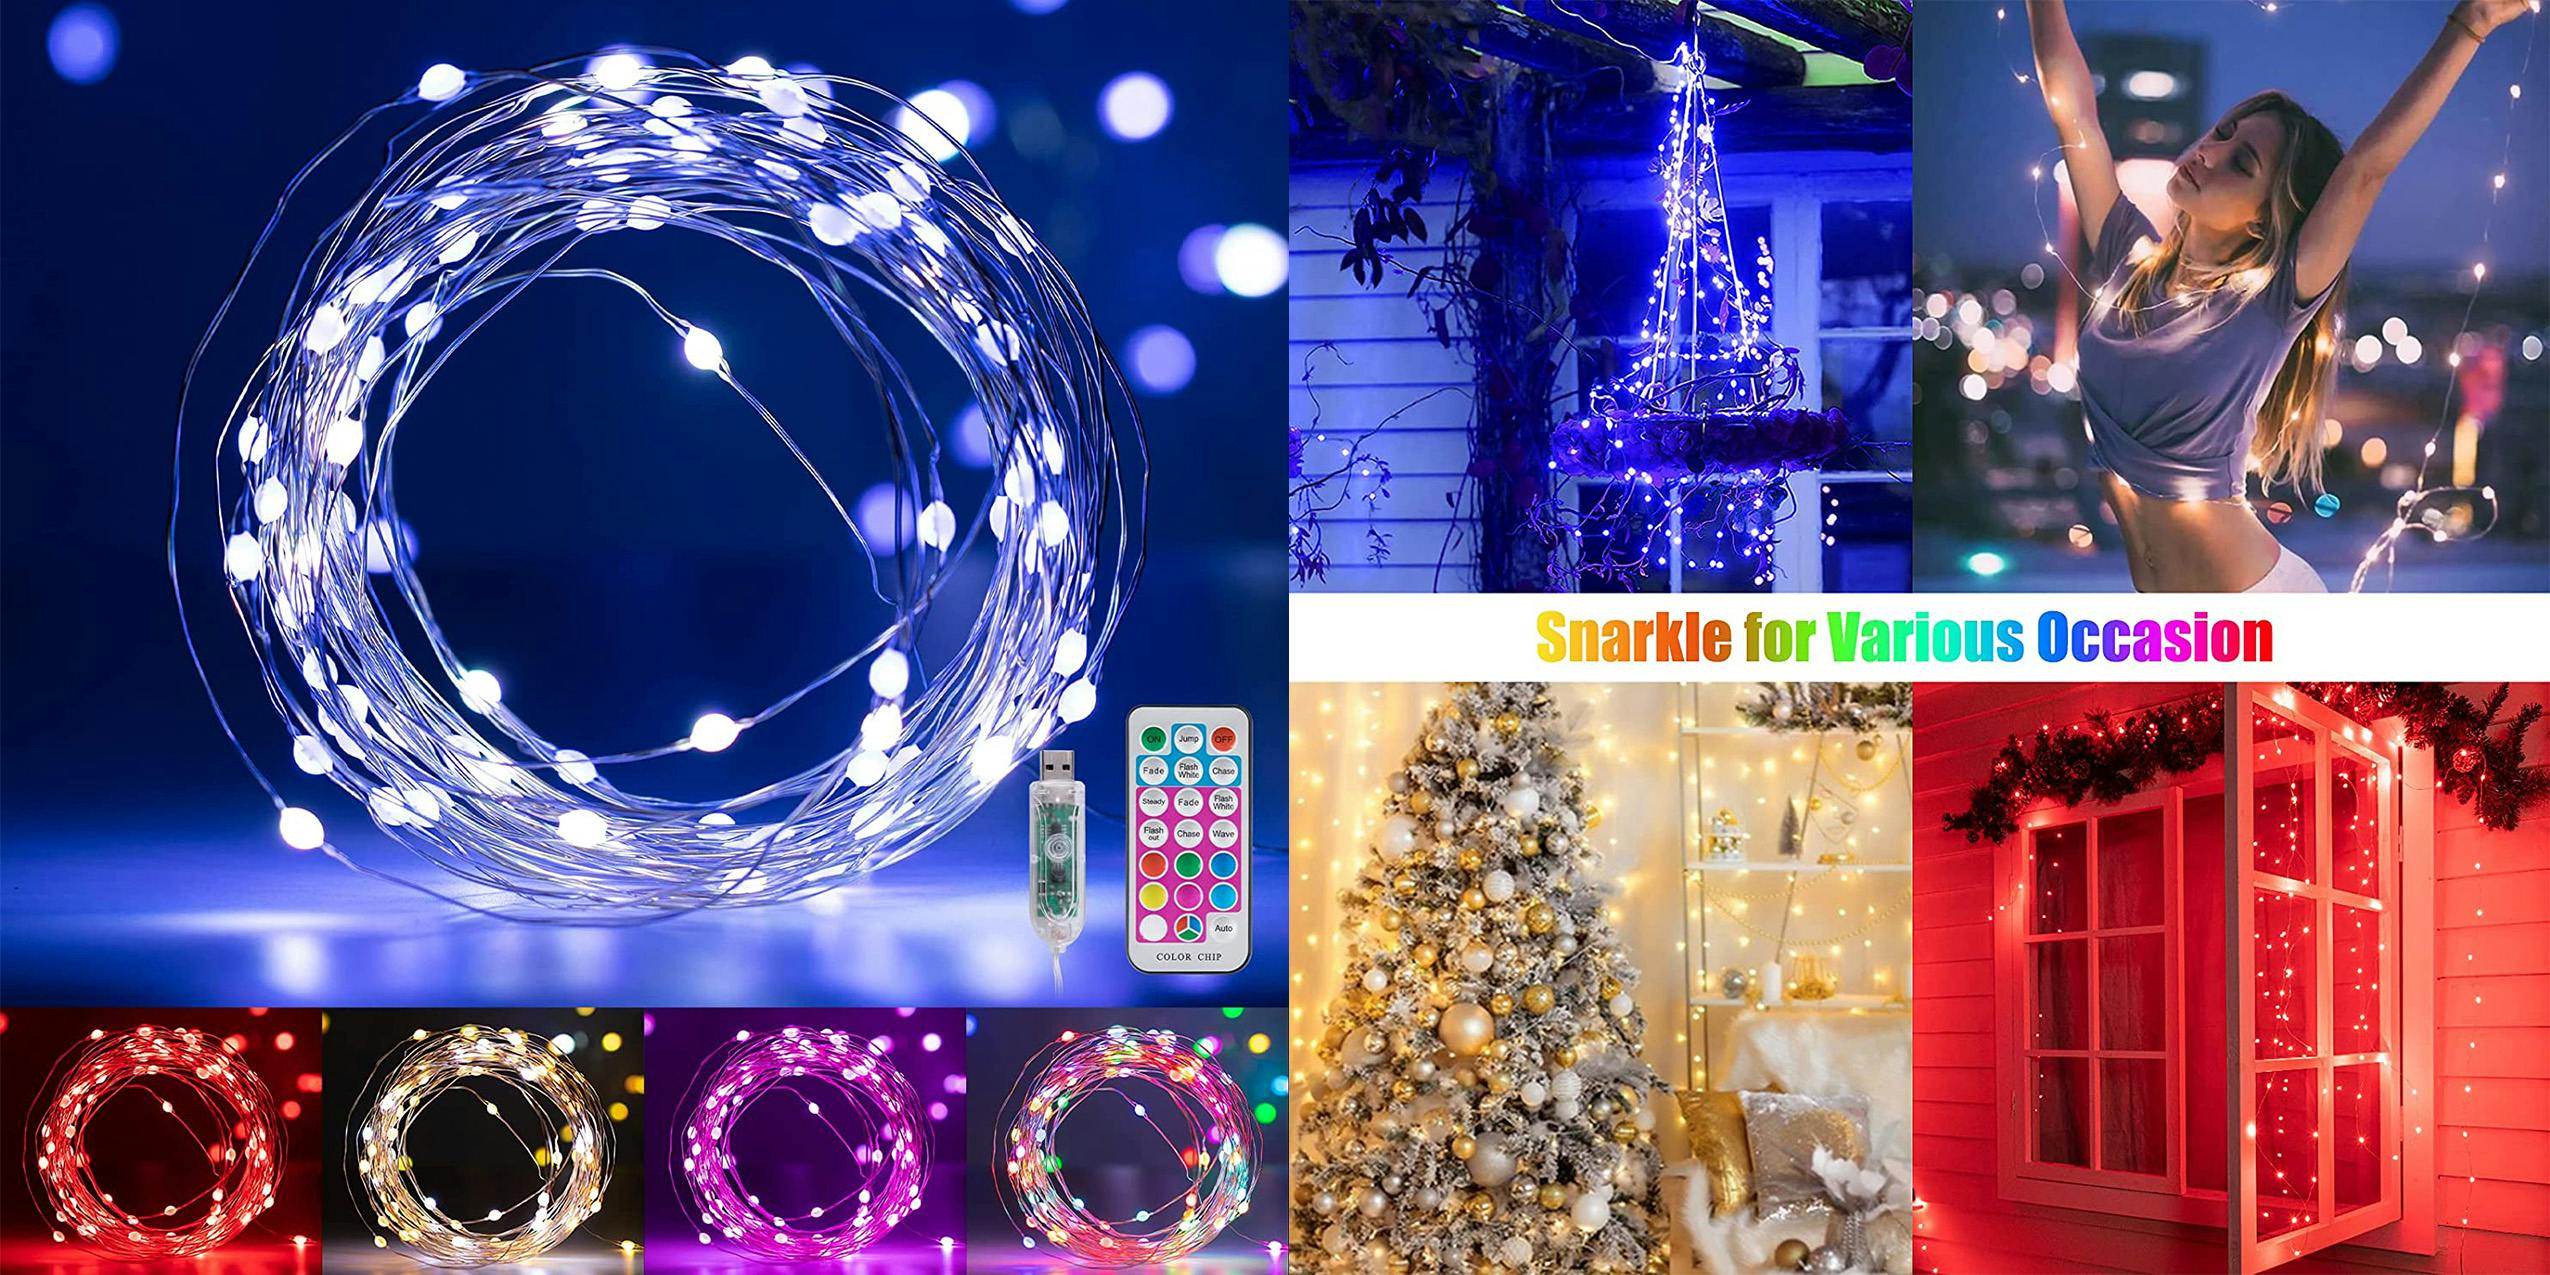 Minetom Fairy Lights product image and display examples.